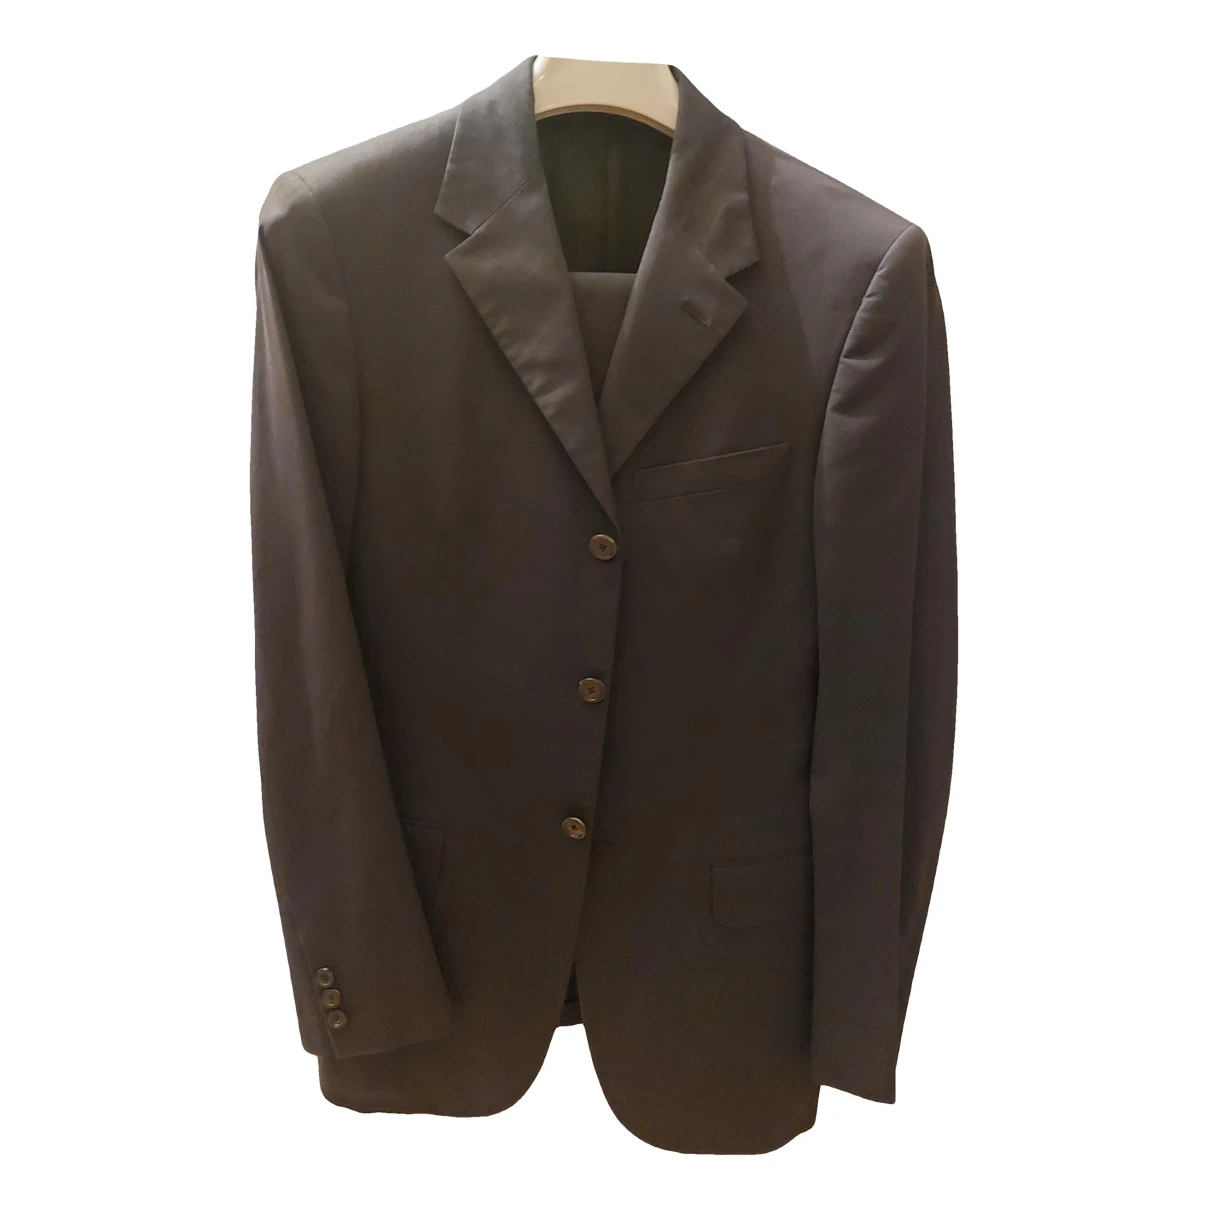 clothing Prada suits for Male Polyester 46 IT. Used condition